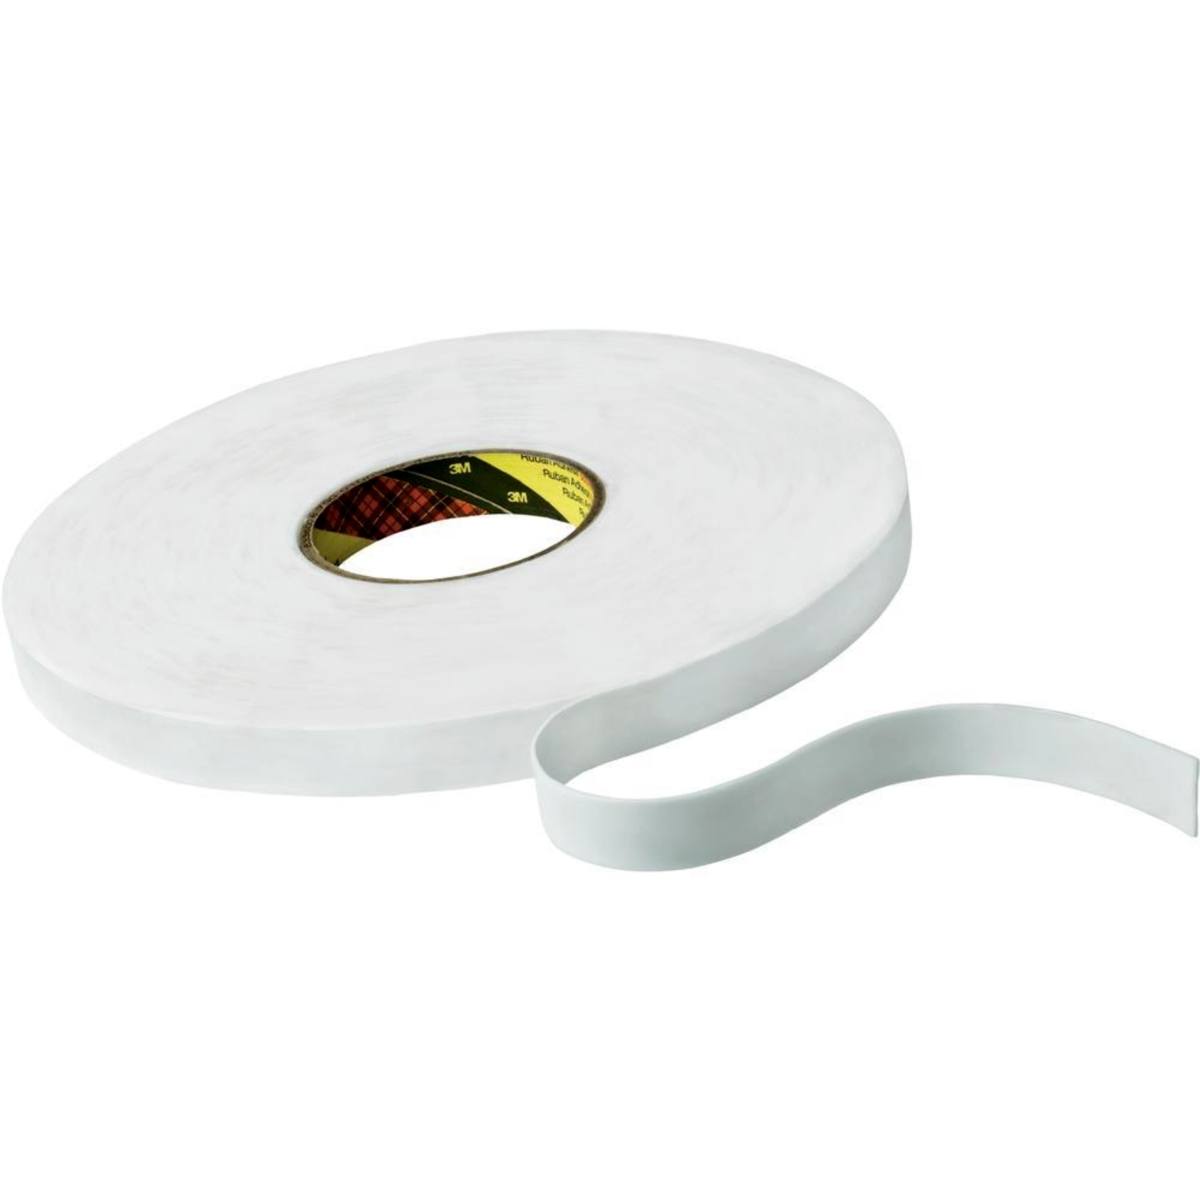 3M Double-sided PE foam tape with acrylic adhesive 9508W, white, 9 mm x 66 m, 0.8 mm